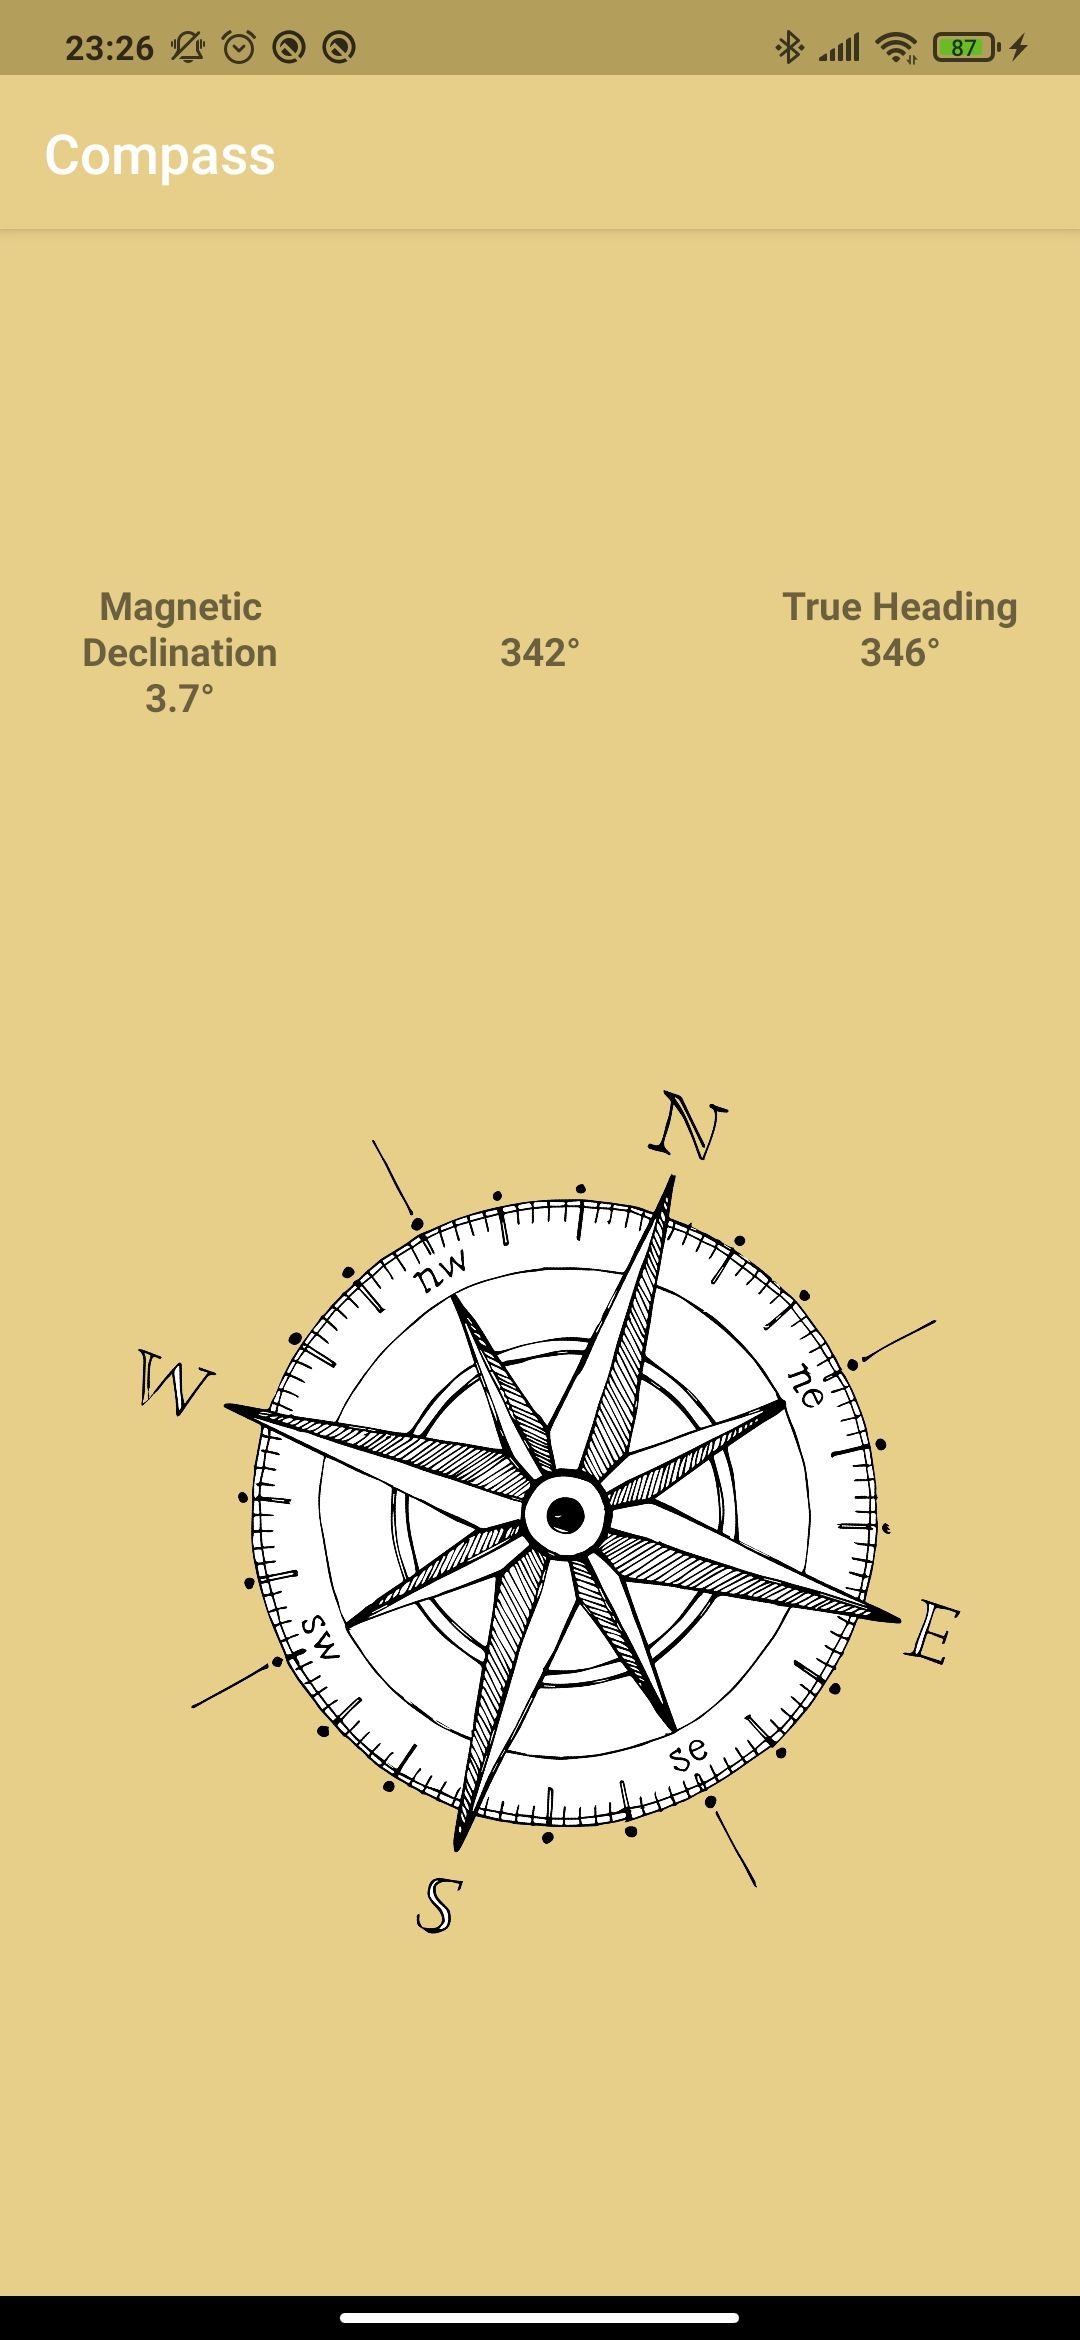 Developing a Compass Android Application